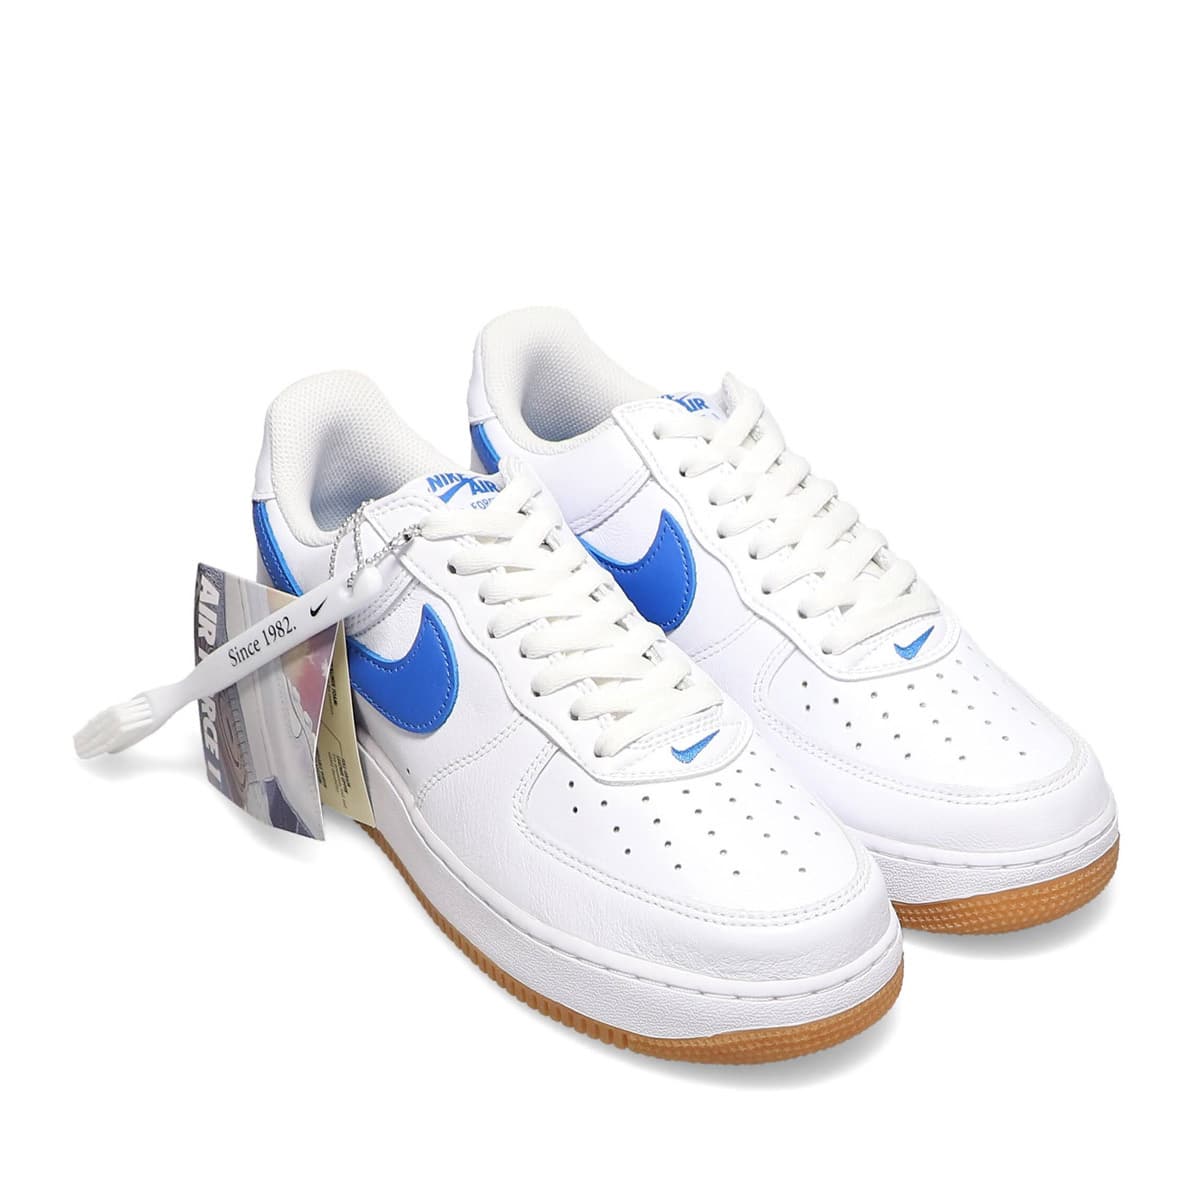 NIKE AIR FORCE 1 LOW RETRO WHITE/ROYAL BLUE-GUM YELLOW 22SP-I_photo_large